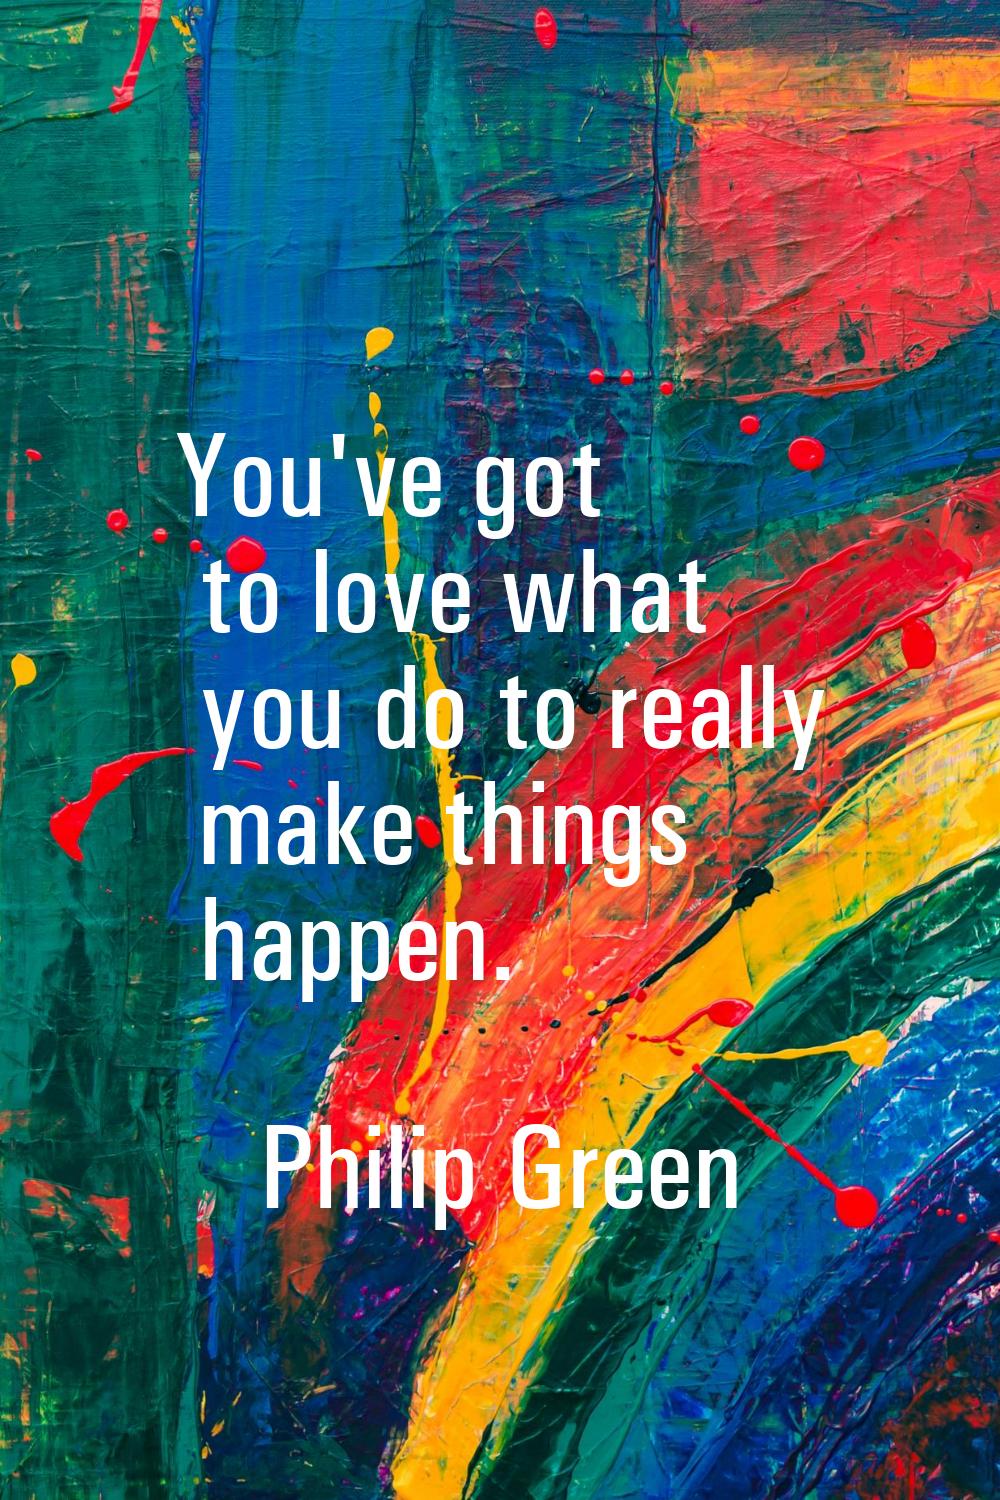 You've got to love what you do to really make things happen.